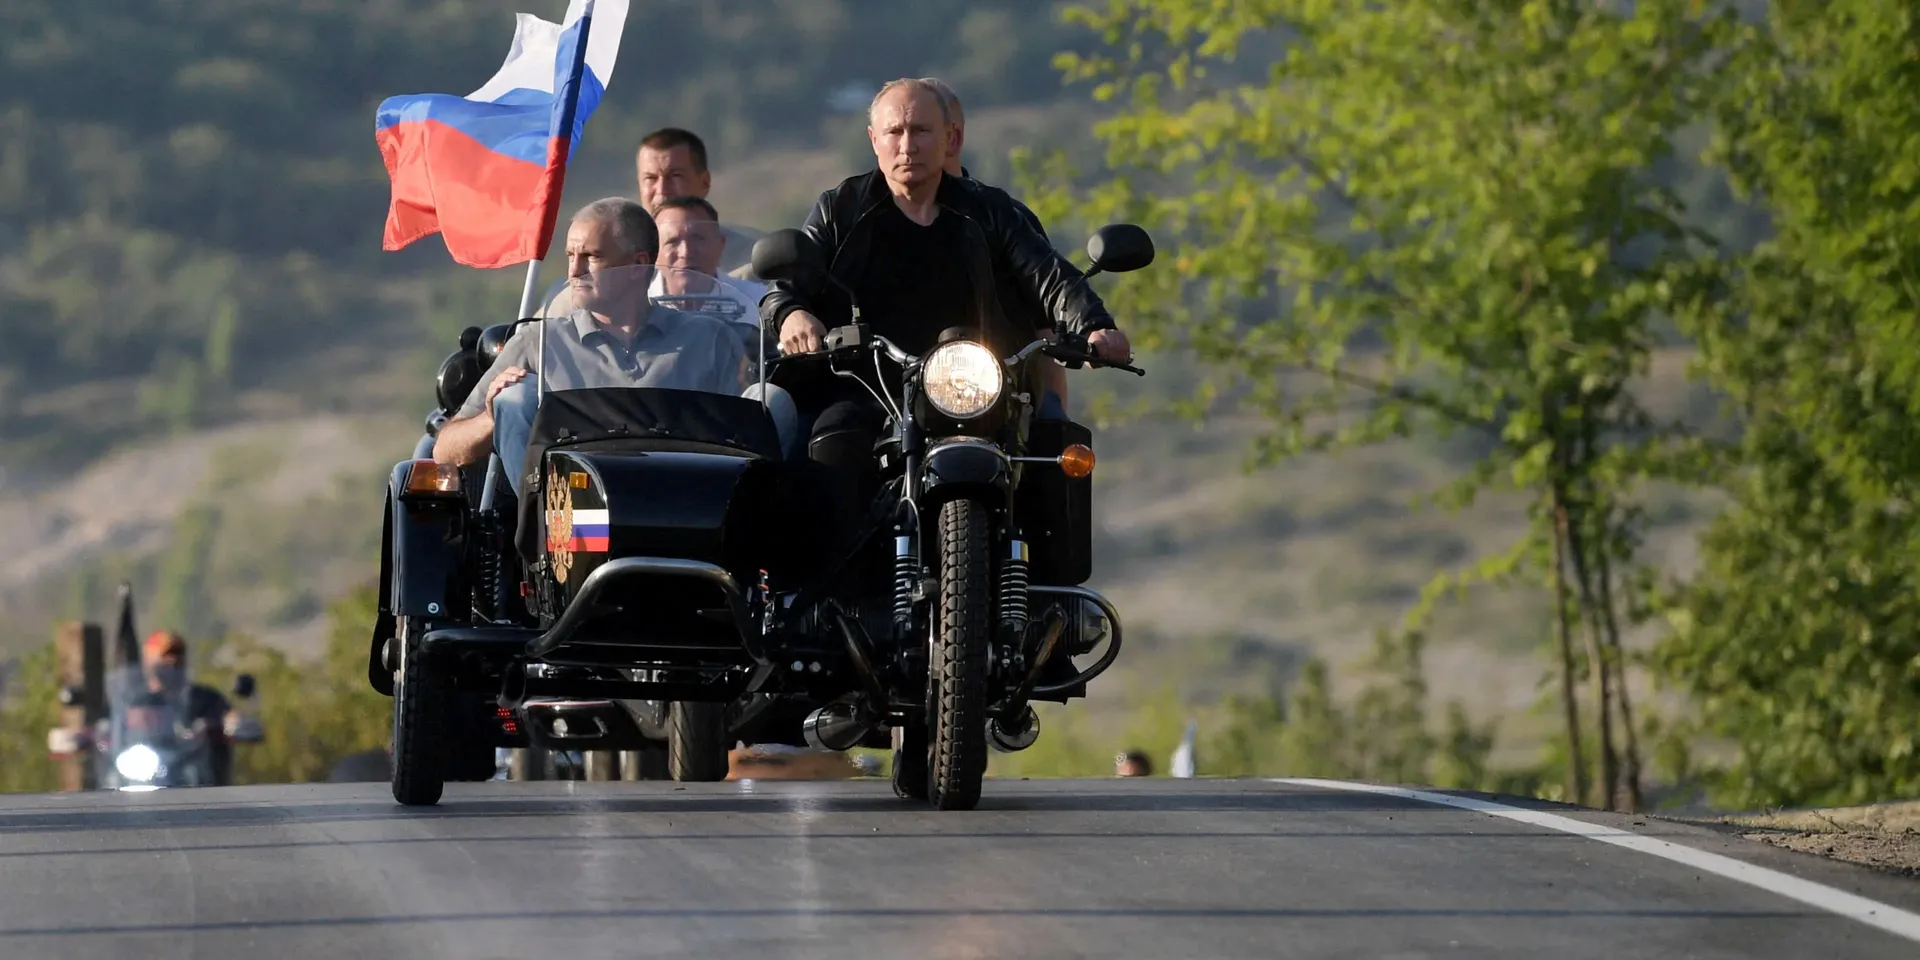 How Putin’s Friends “Bought Out” Occupied Crimea